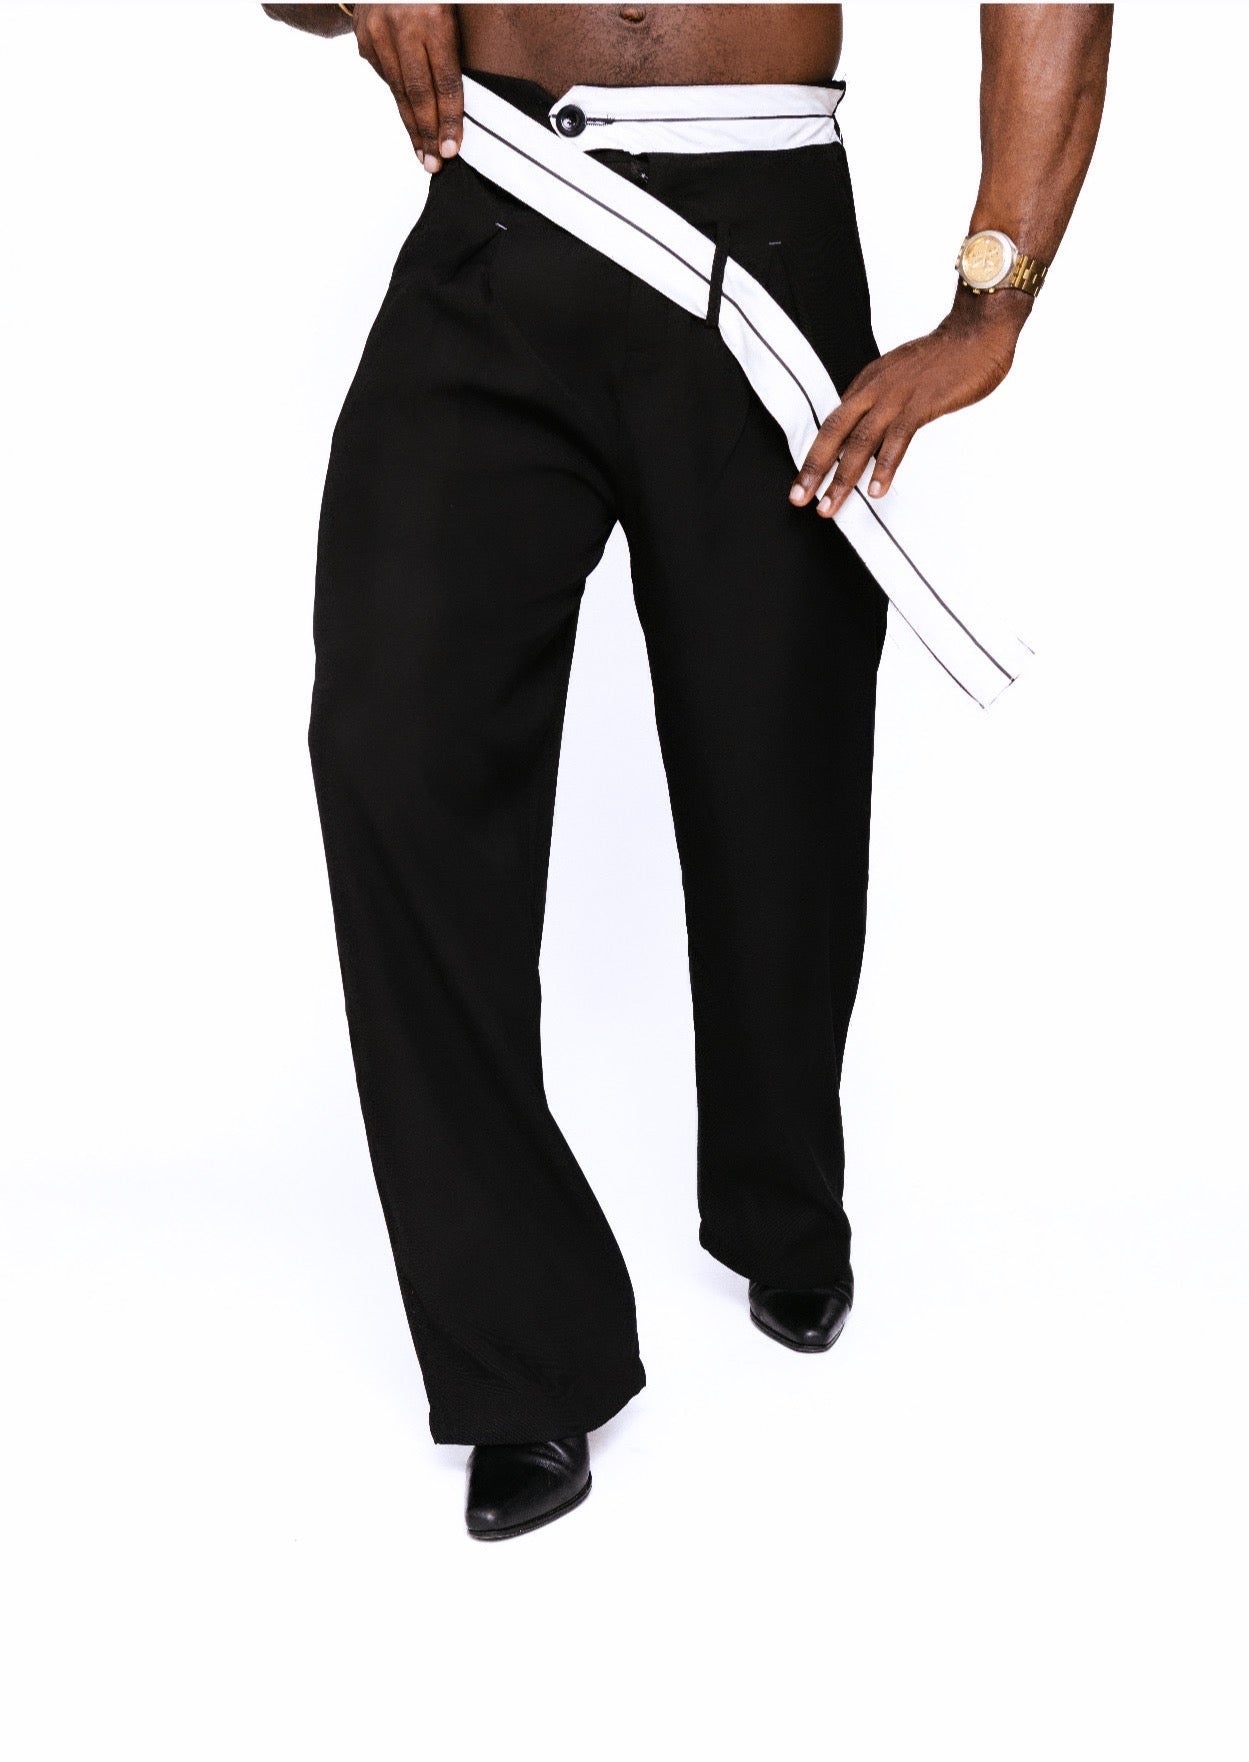 The Belted Dress Pants